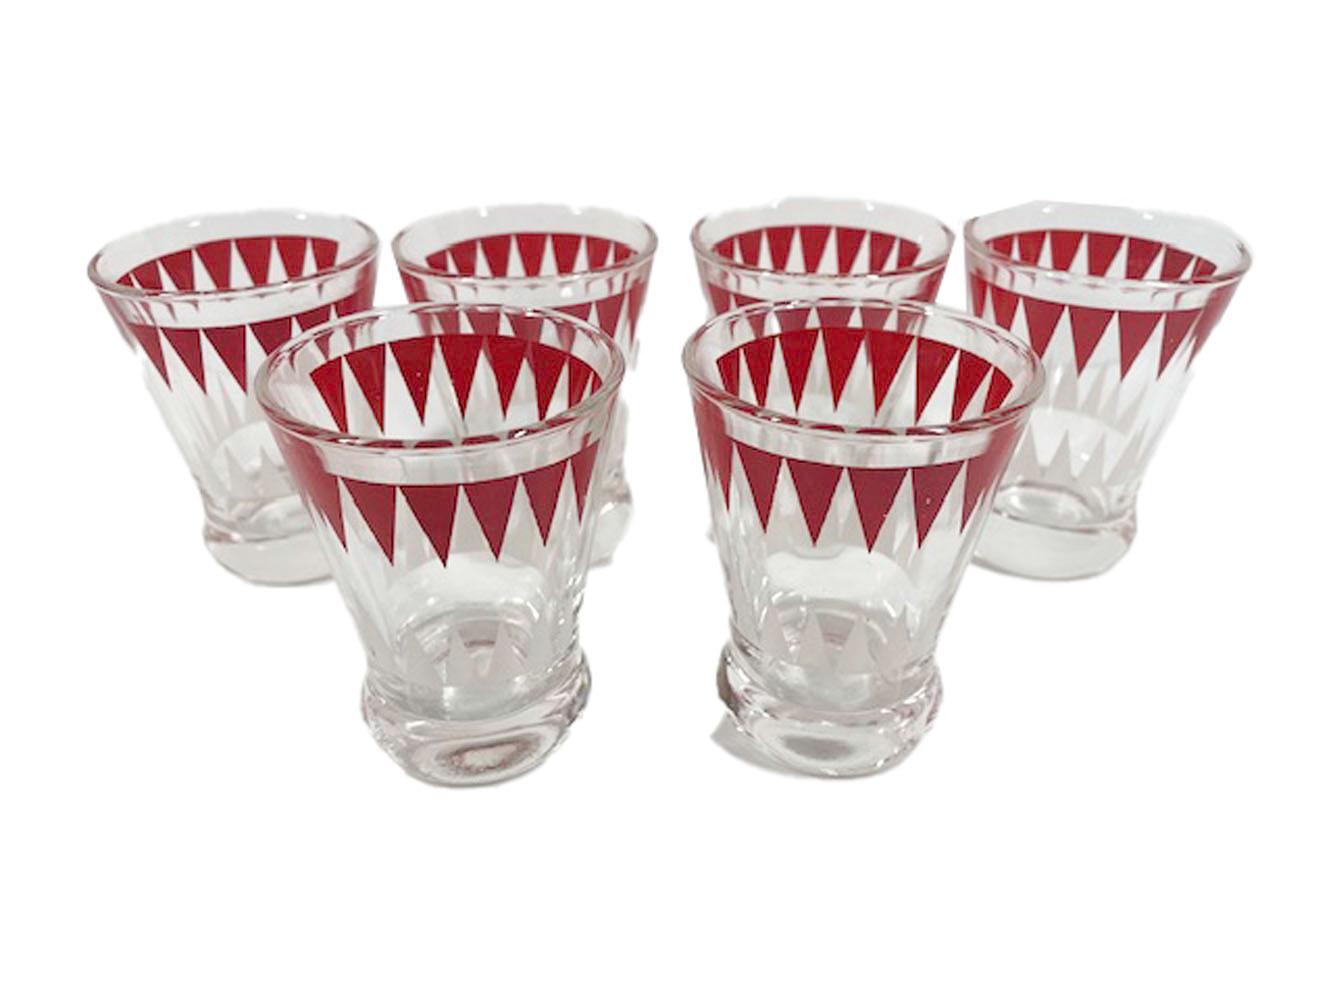 Art Deco Cocktail Shaker Set w/Geometric Red and White Arrow Design In Good Condition For Sale In Nantucket, MA